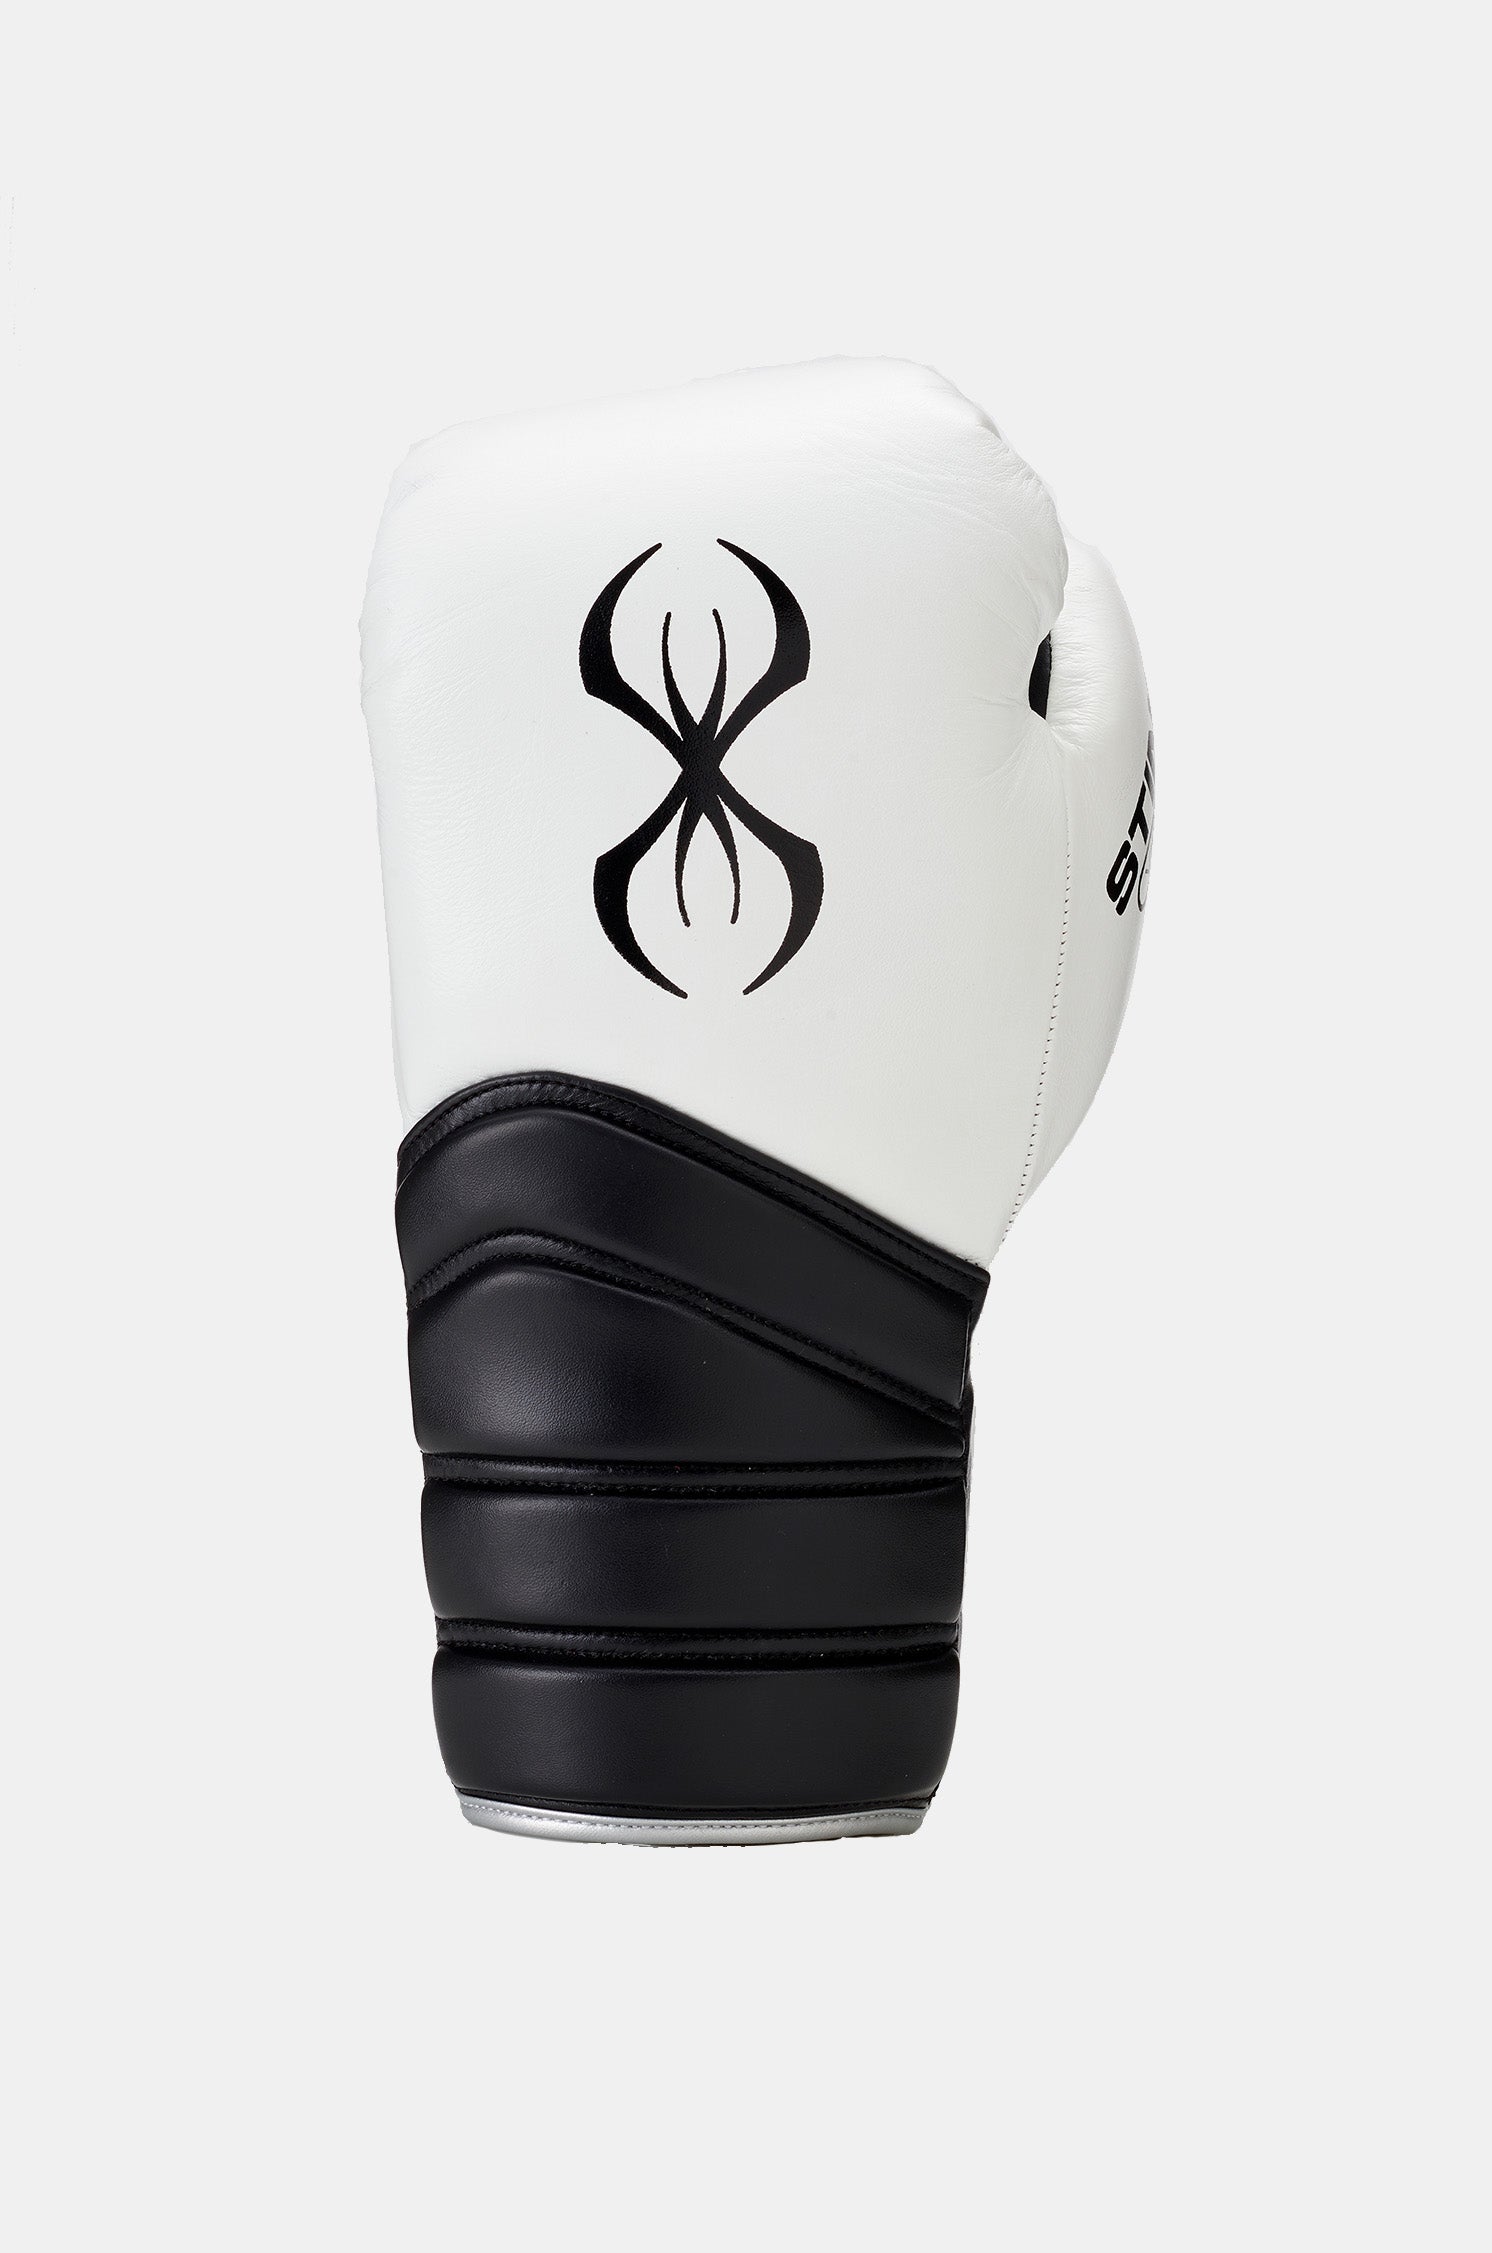 Viper X Boxing Sparring Glove - Lace